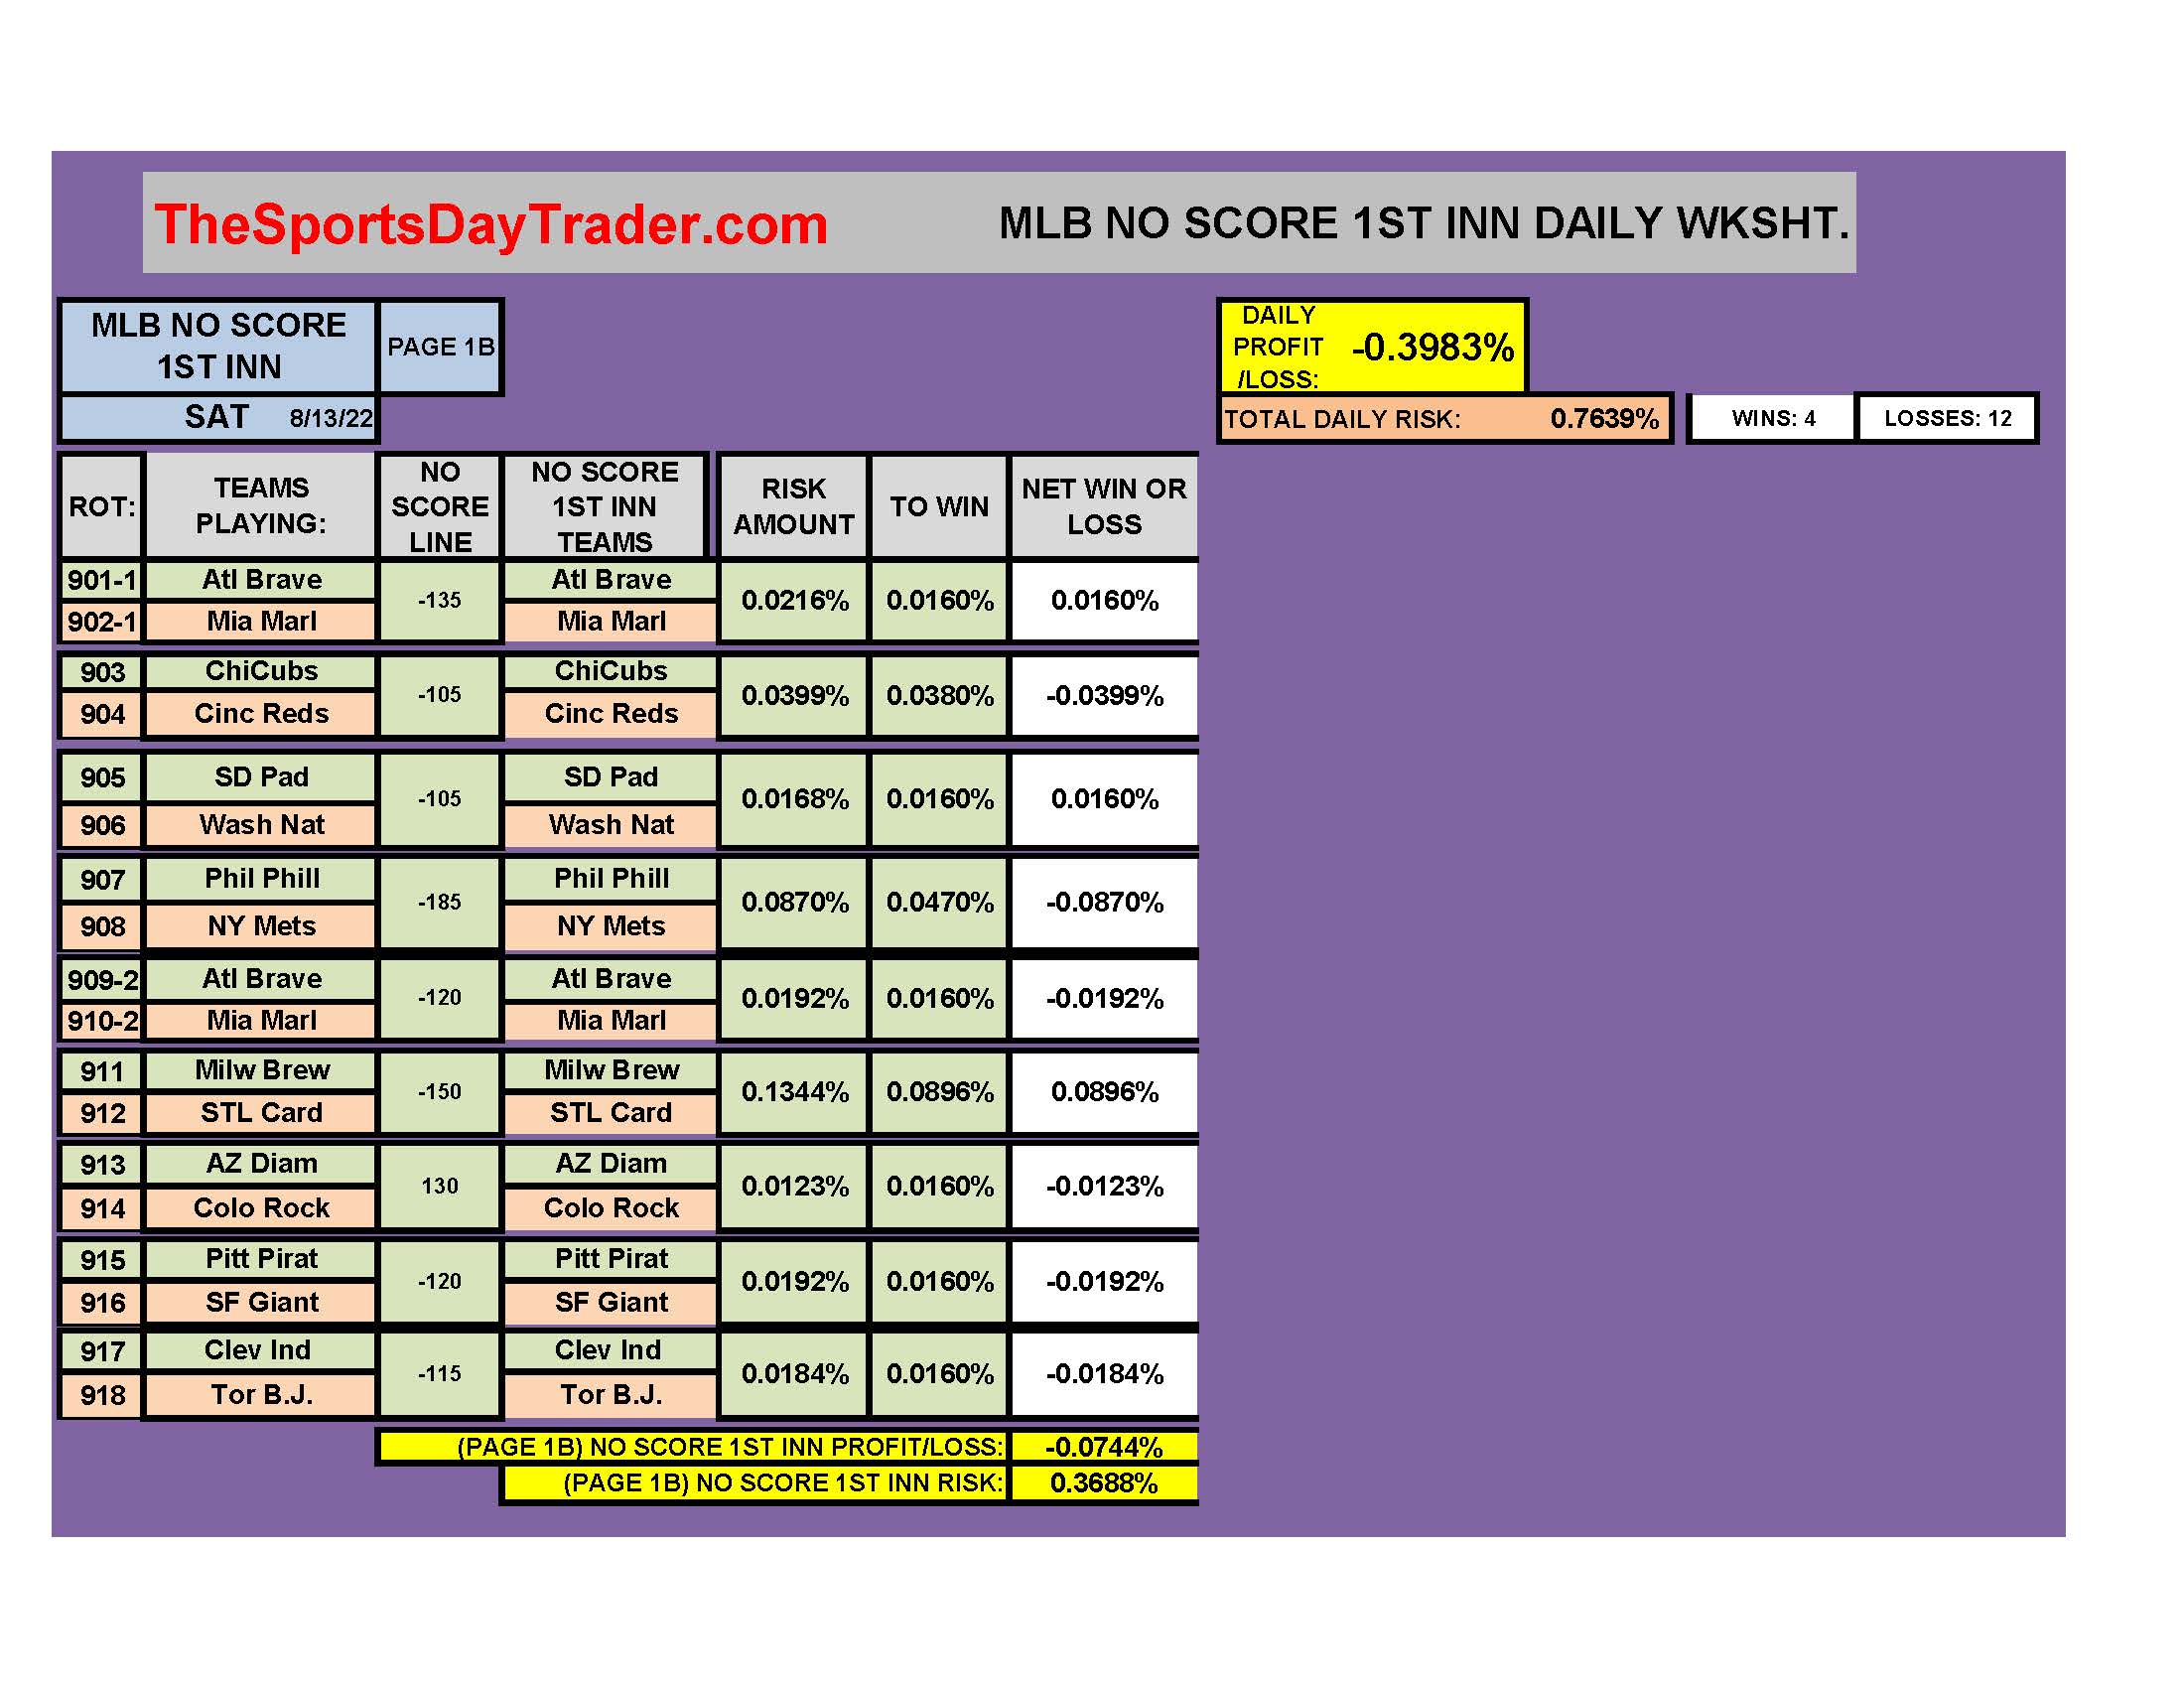 MLB 8/13/22 NO SCORE 1ST INNING DAILY RESULTS page 1